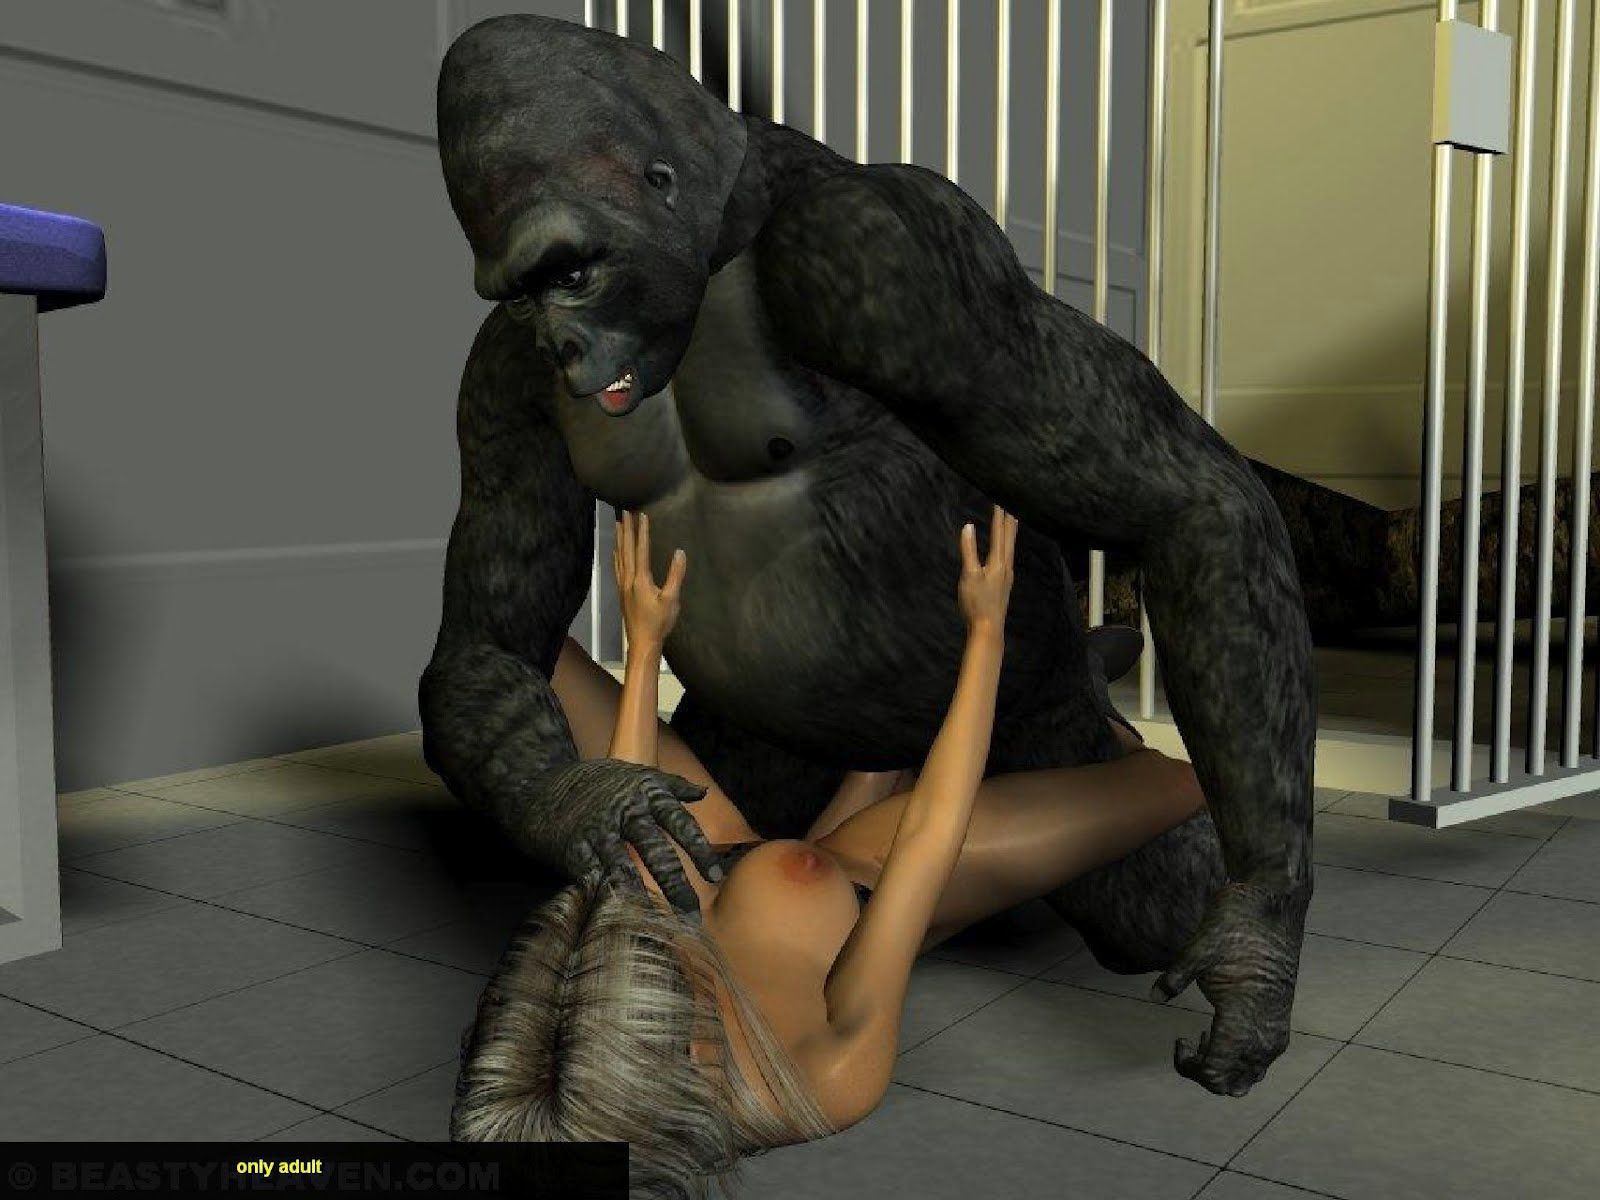 best of Woman naked Gorilla and